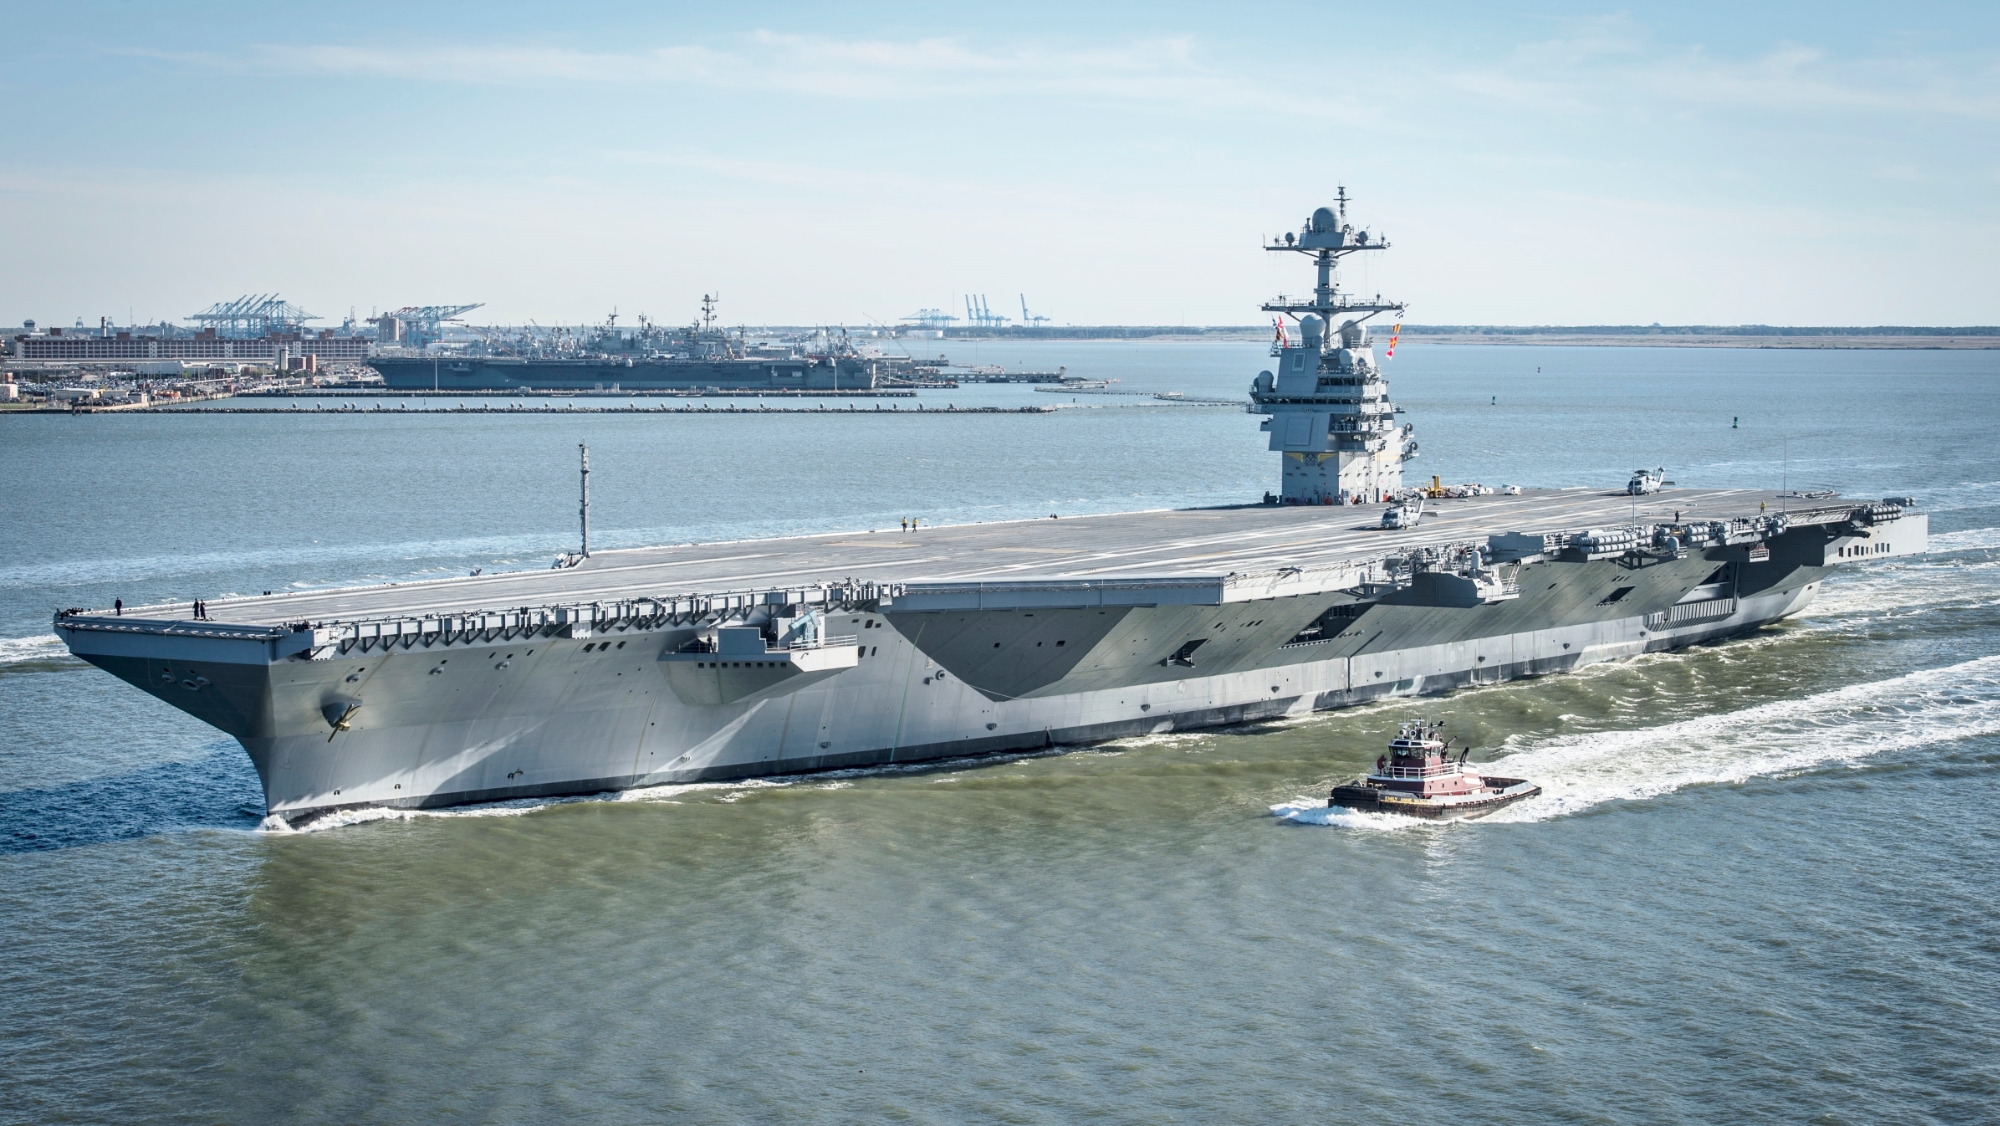 The United States deploys the newest aircraft carrier USS Gerald R. Ford (CVN-78) for the first time: it will take part in NATO exercises in the Atlantic Ocean